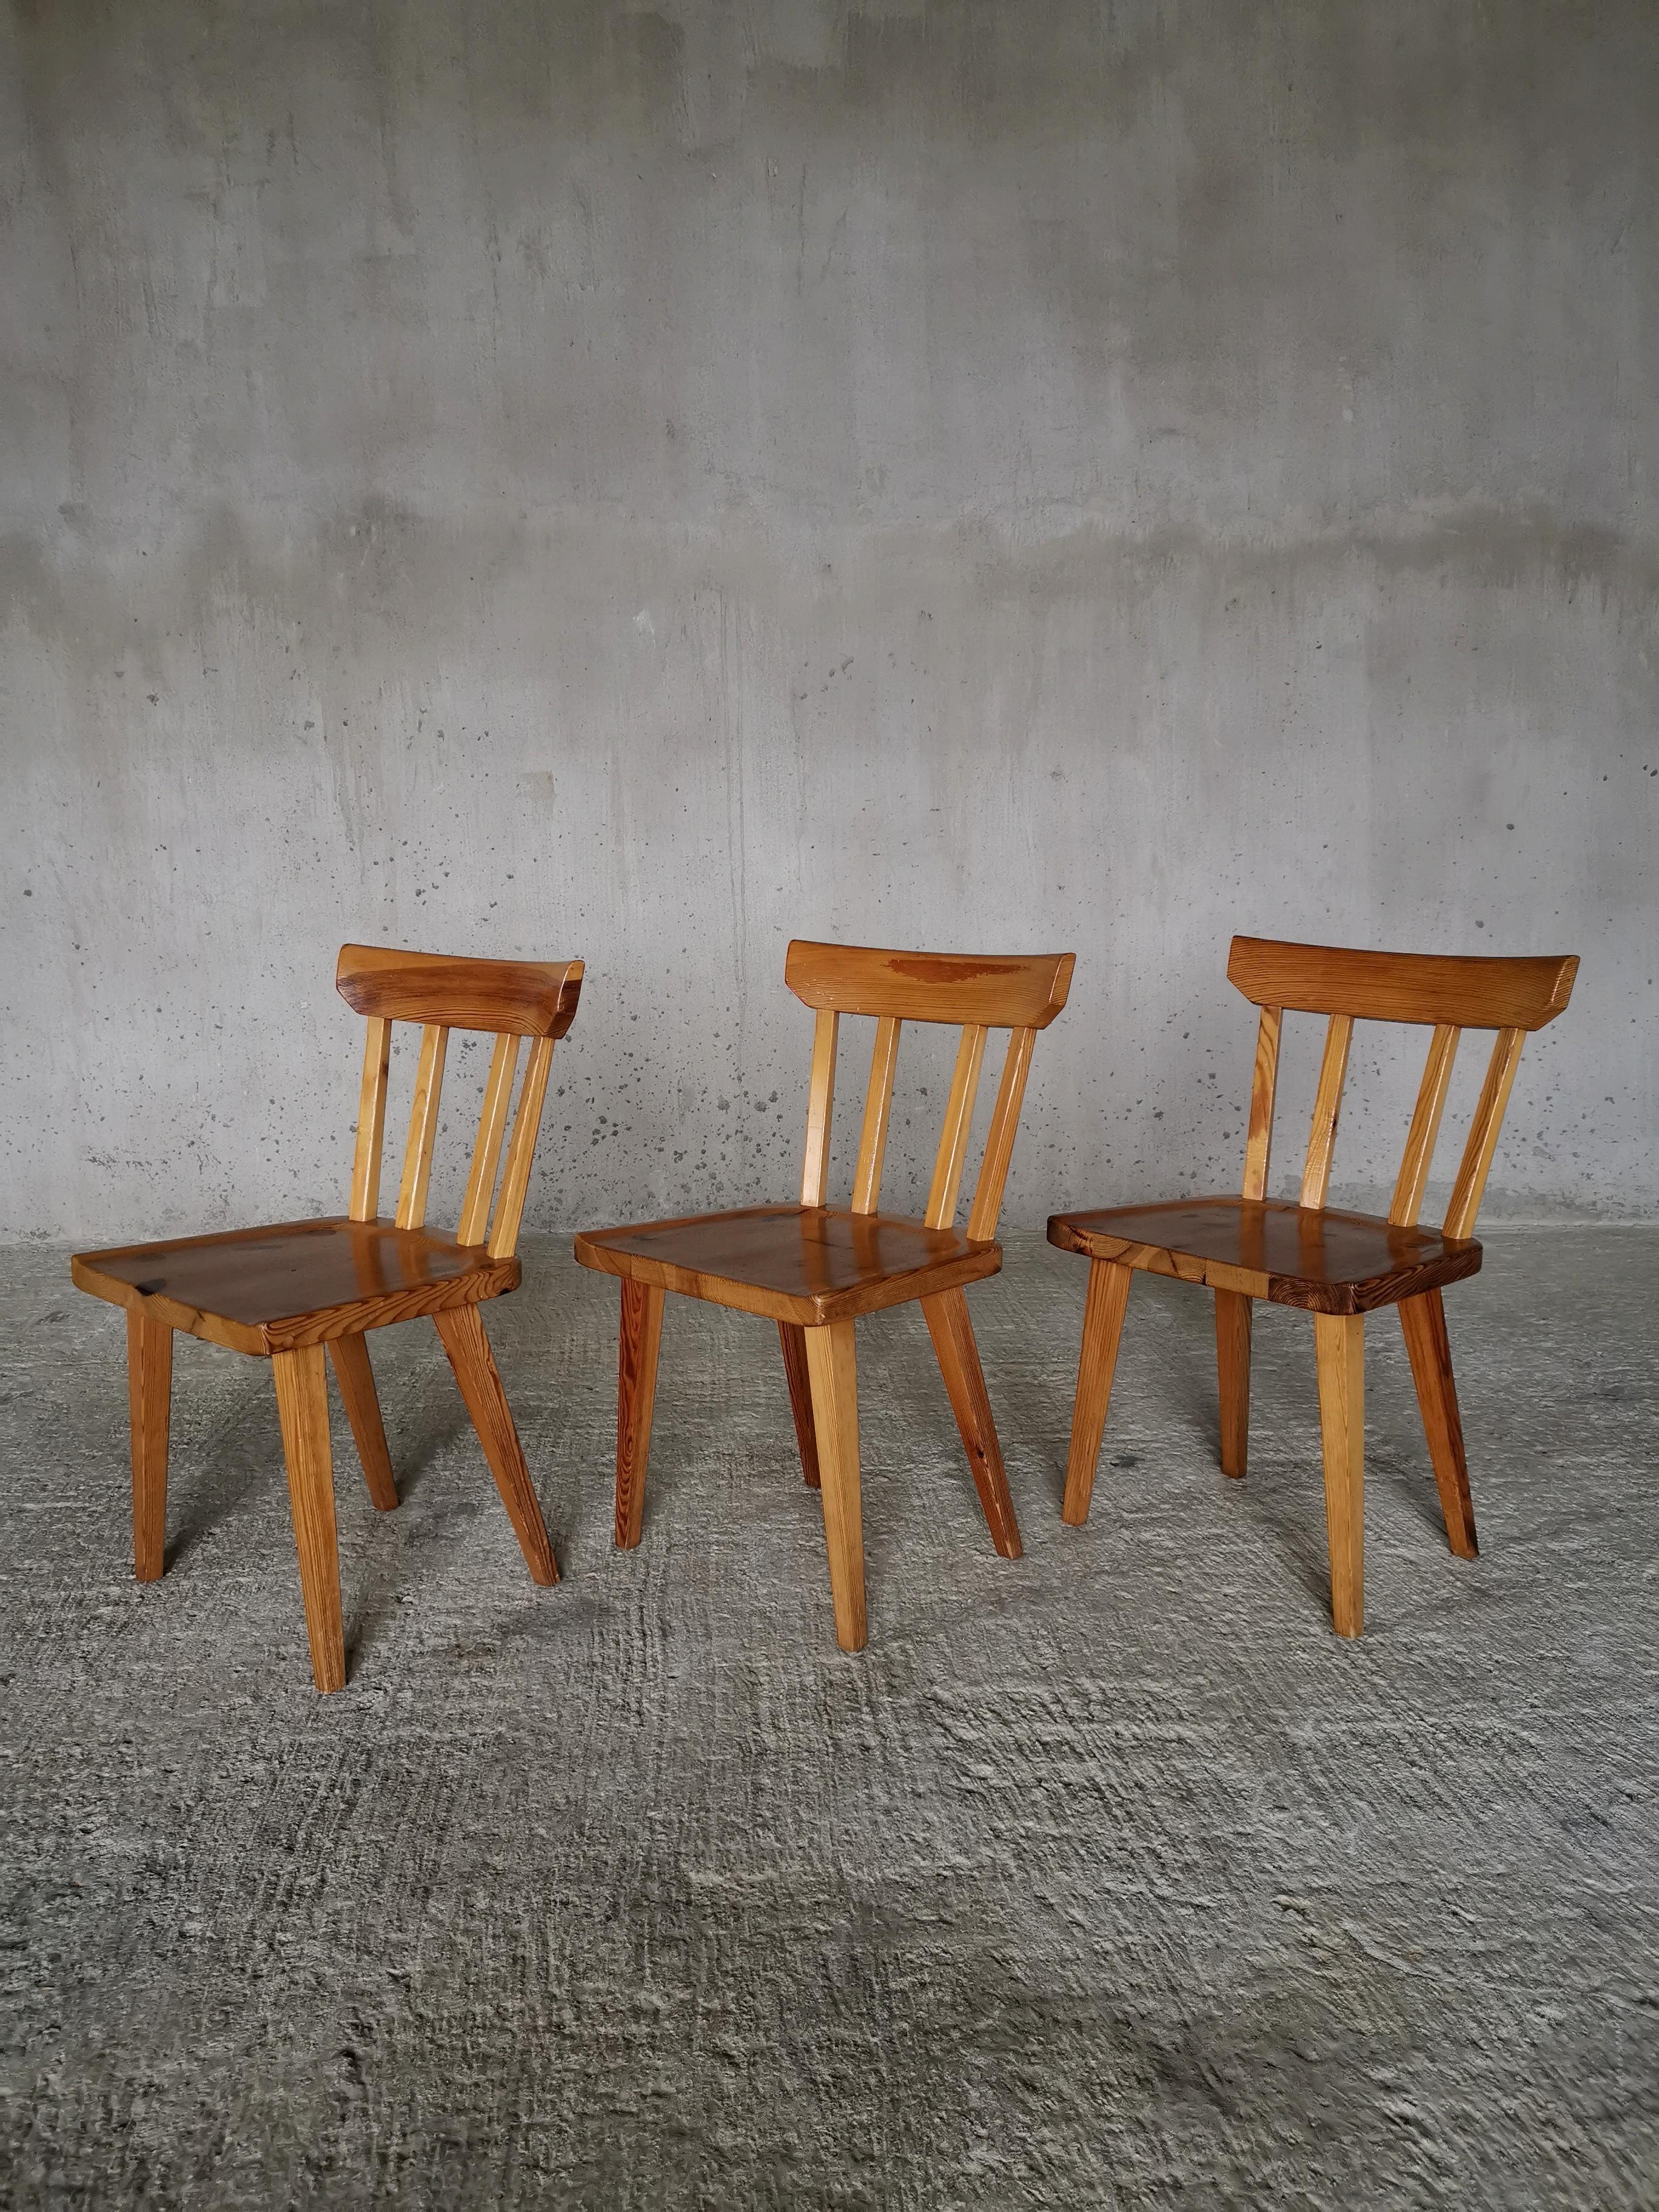 Set of three dining chairs in solid Oregon pine, design Carl Malmsten.
Produced by Karl Andersson & Söner, 
Sweden 1960s
Vintage condition, wear consistent with age and use. 
Distinctive and beautiful visible joinery work. Beautiful wood grain and